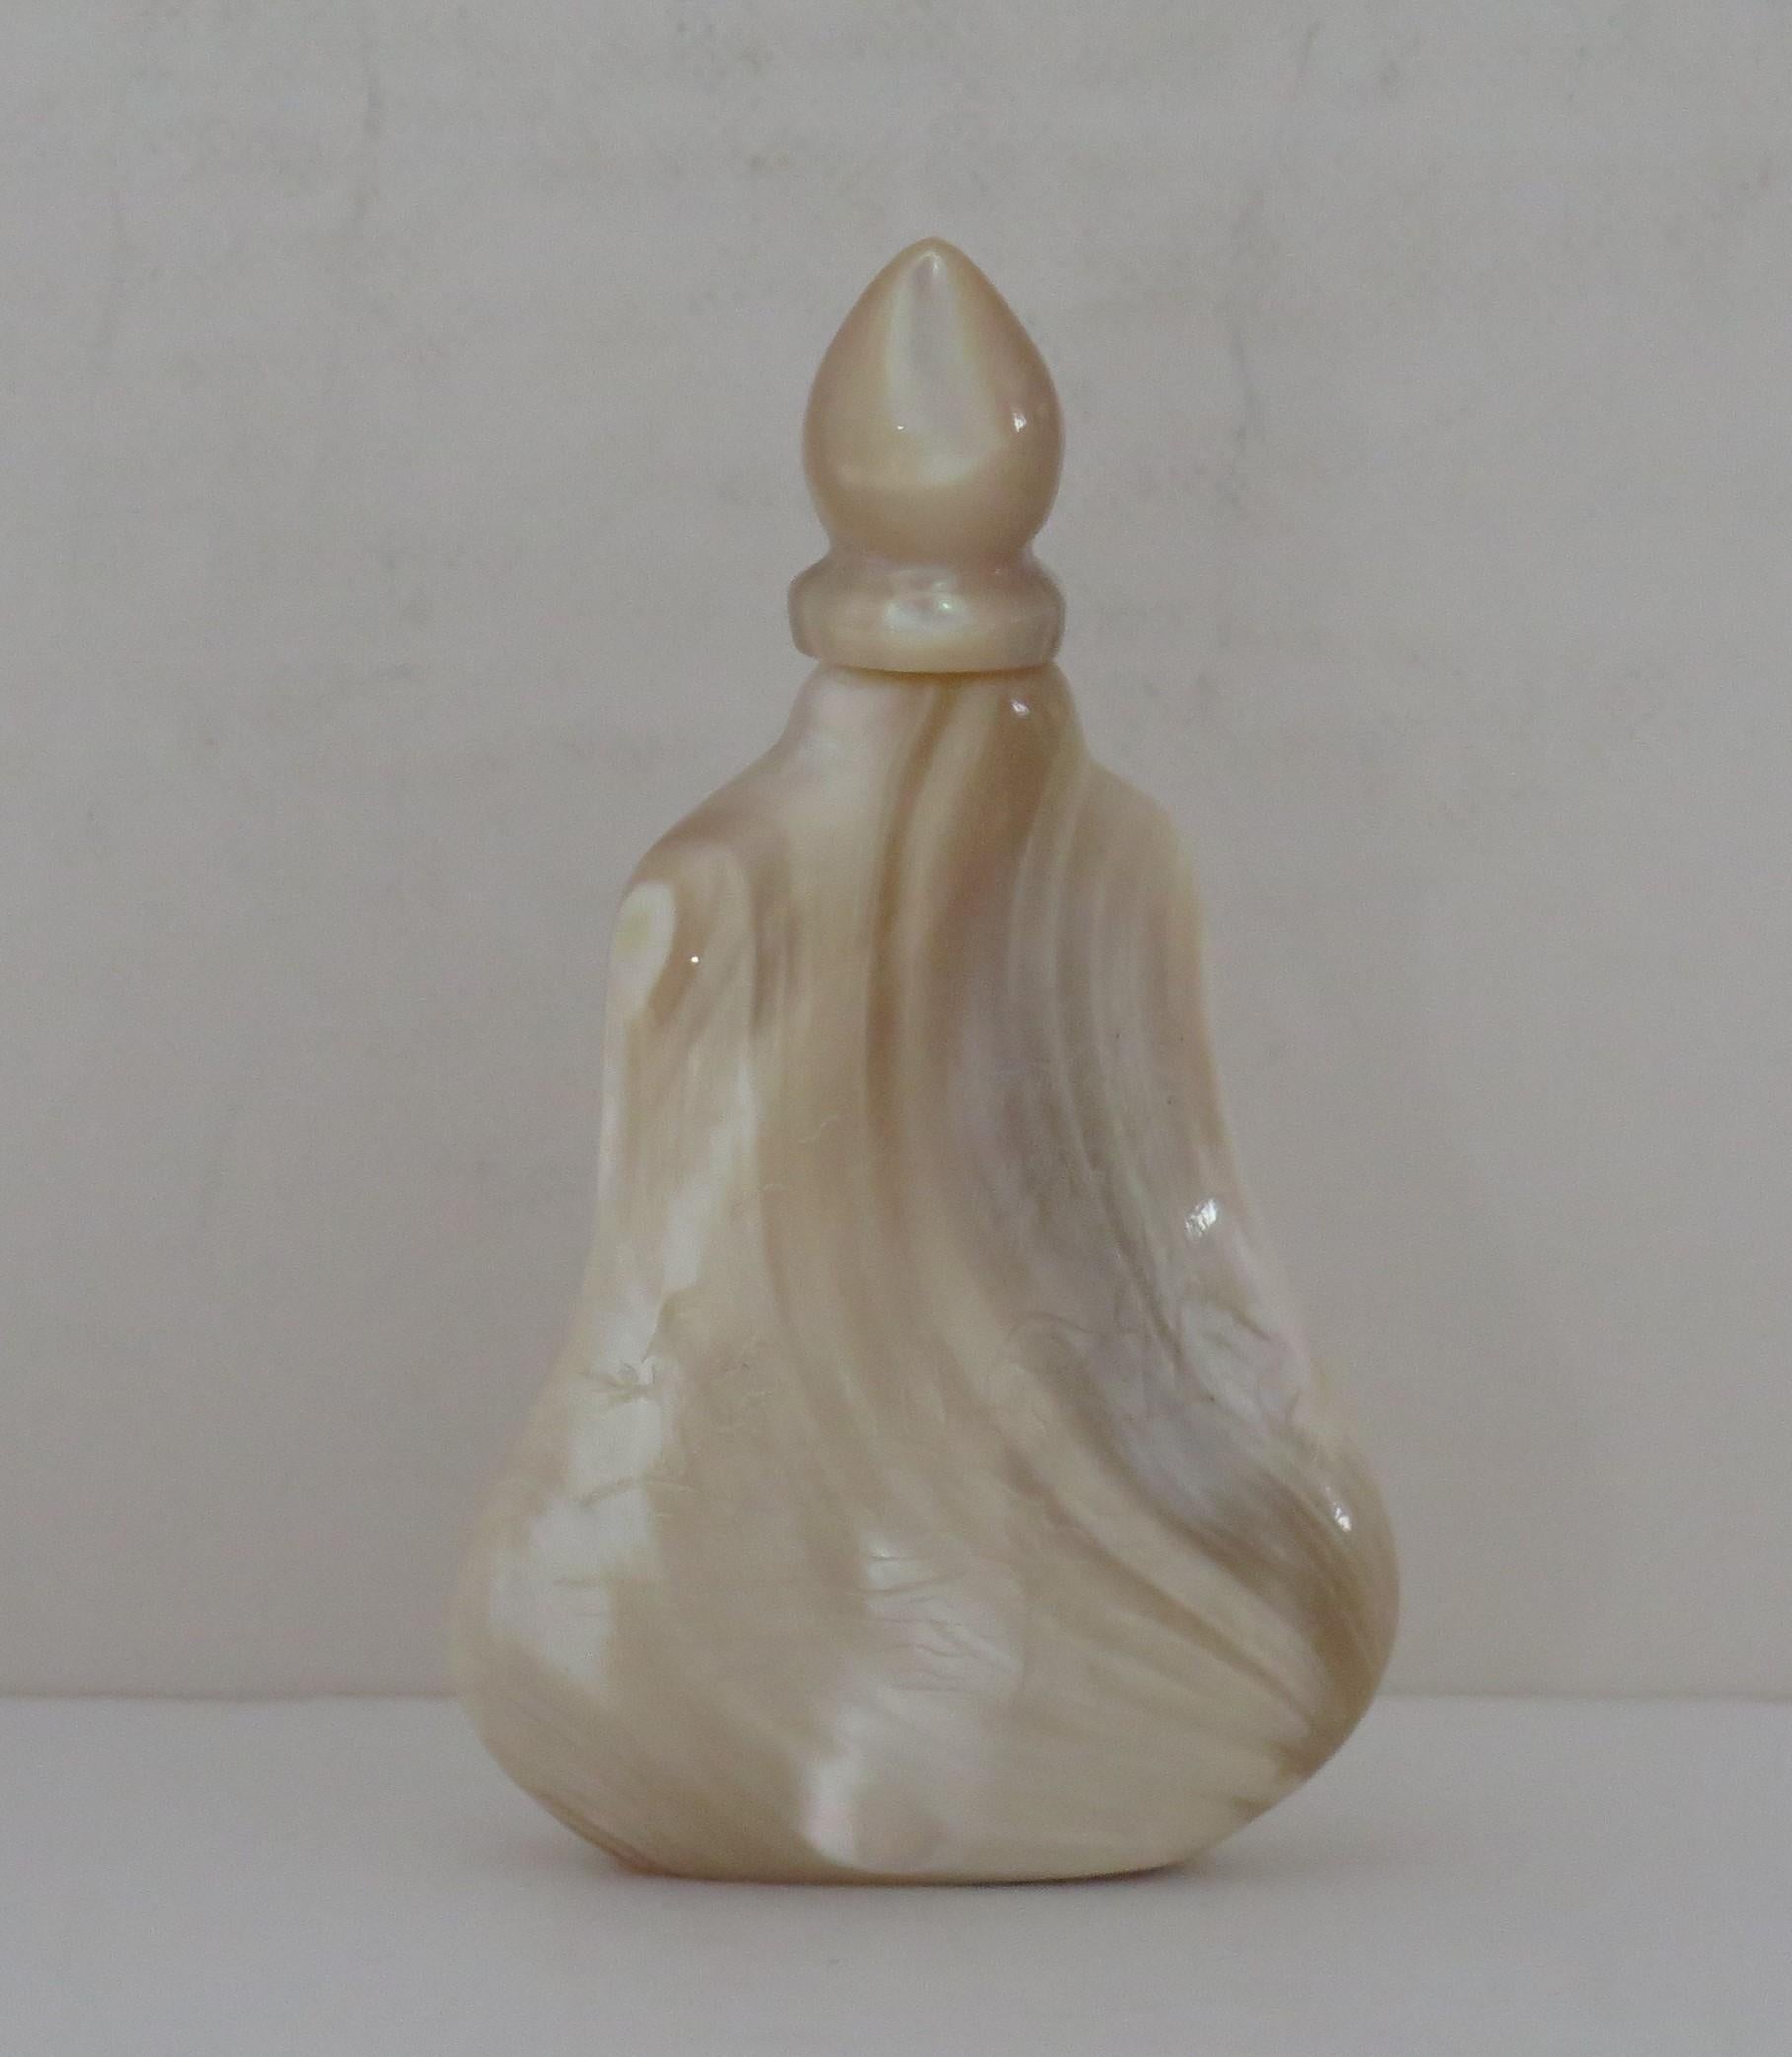 Chinese Export Snuff Bottle of Natural Agate Stone Spoon Top, circa 1930 For Sale 1